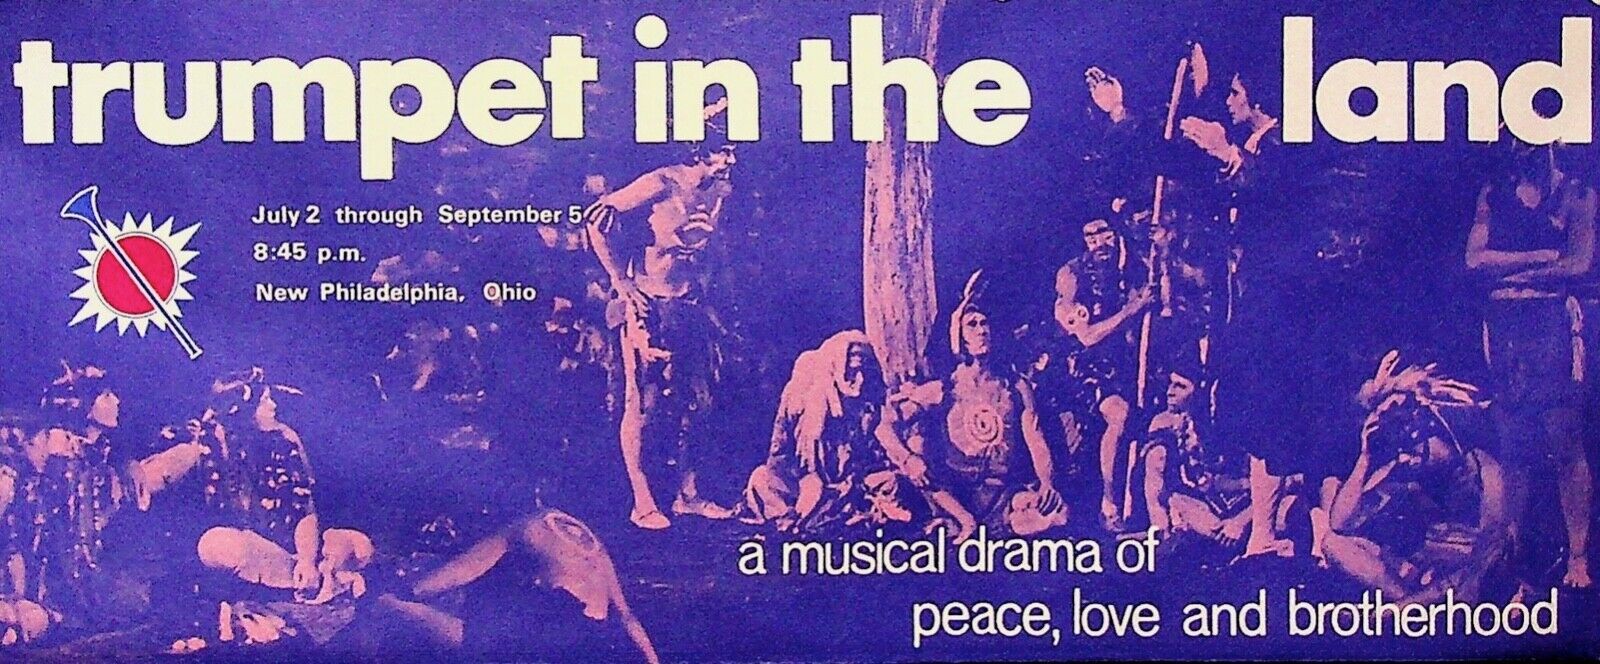 VINTAGE TRUMPET IN THE LAND A MUSICAL DRAMA PEACE, LOVE AND BROTHERHOOD BROCHURE